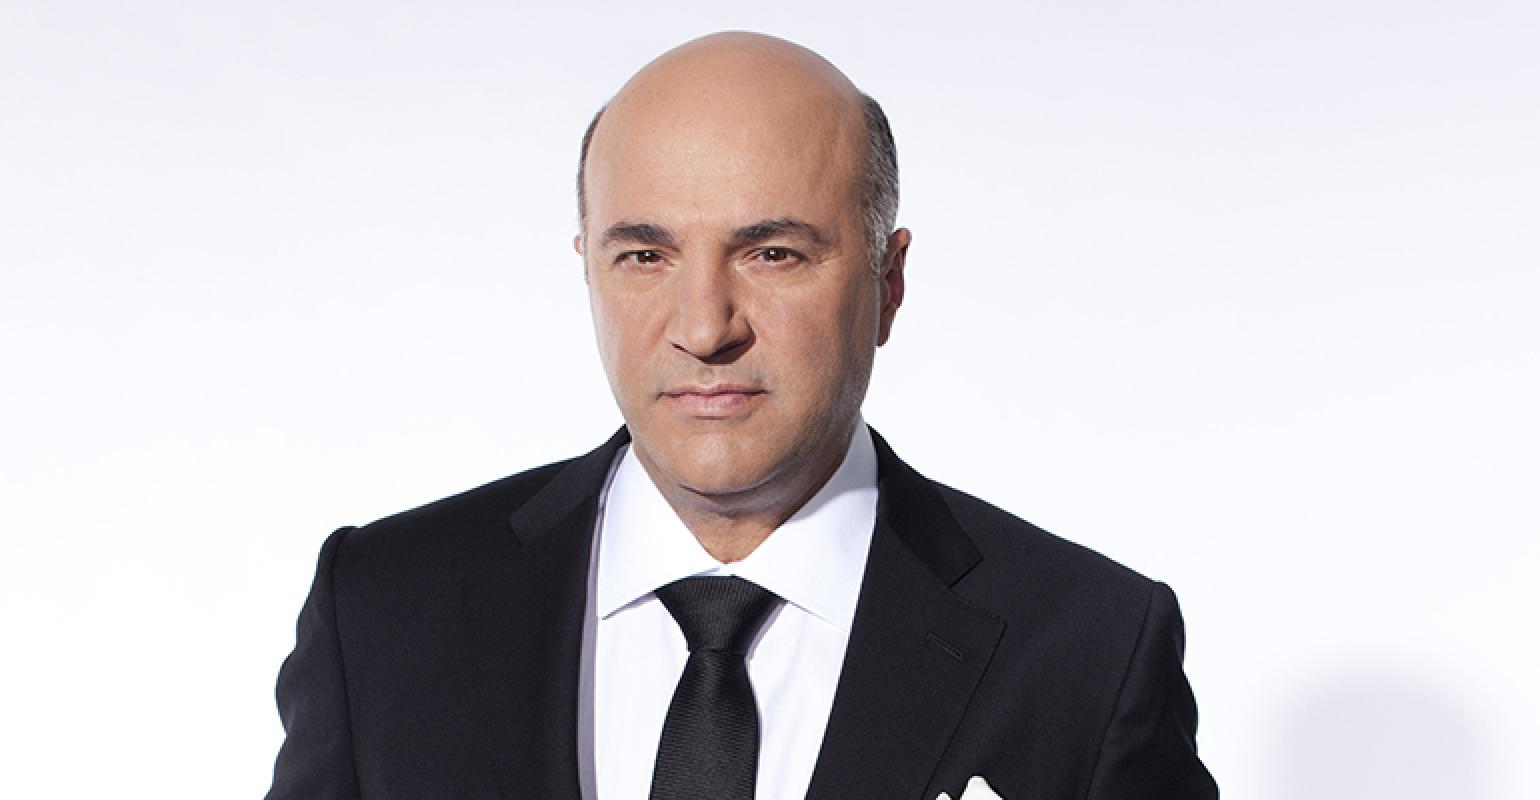 Kevin O'Leary: “The Advisory Business Is Going to Be Here Forever”